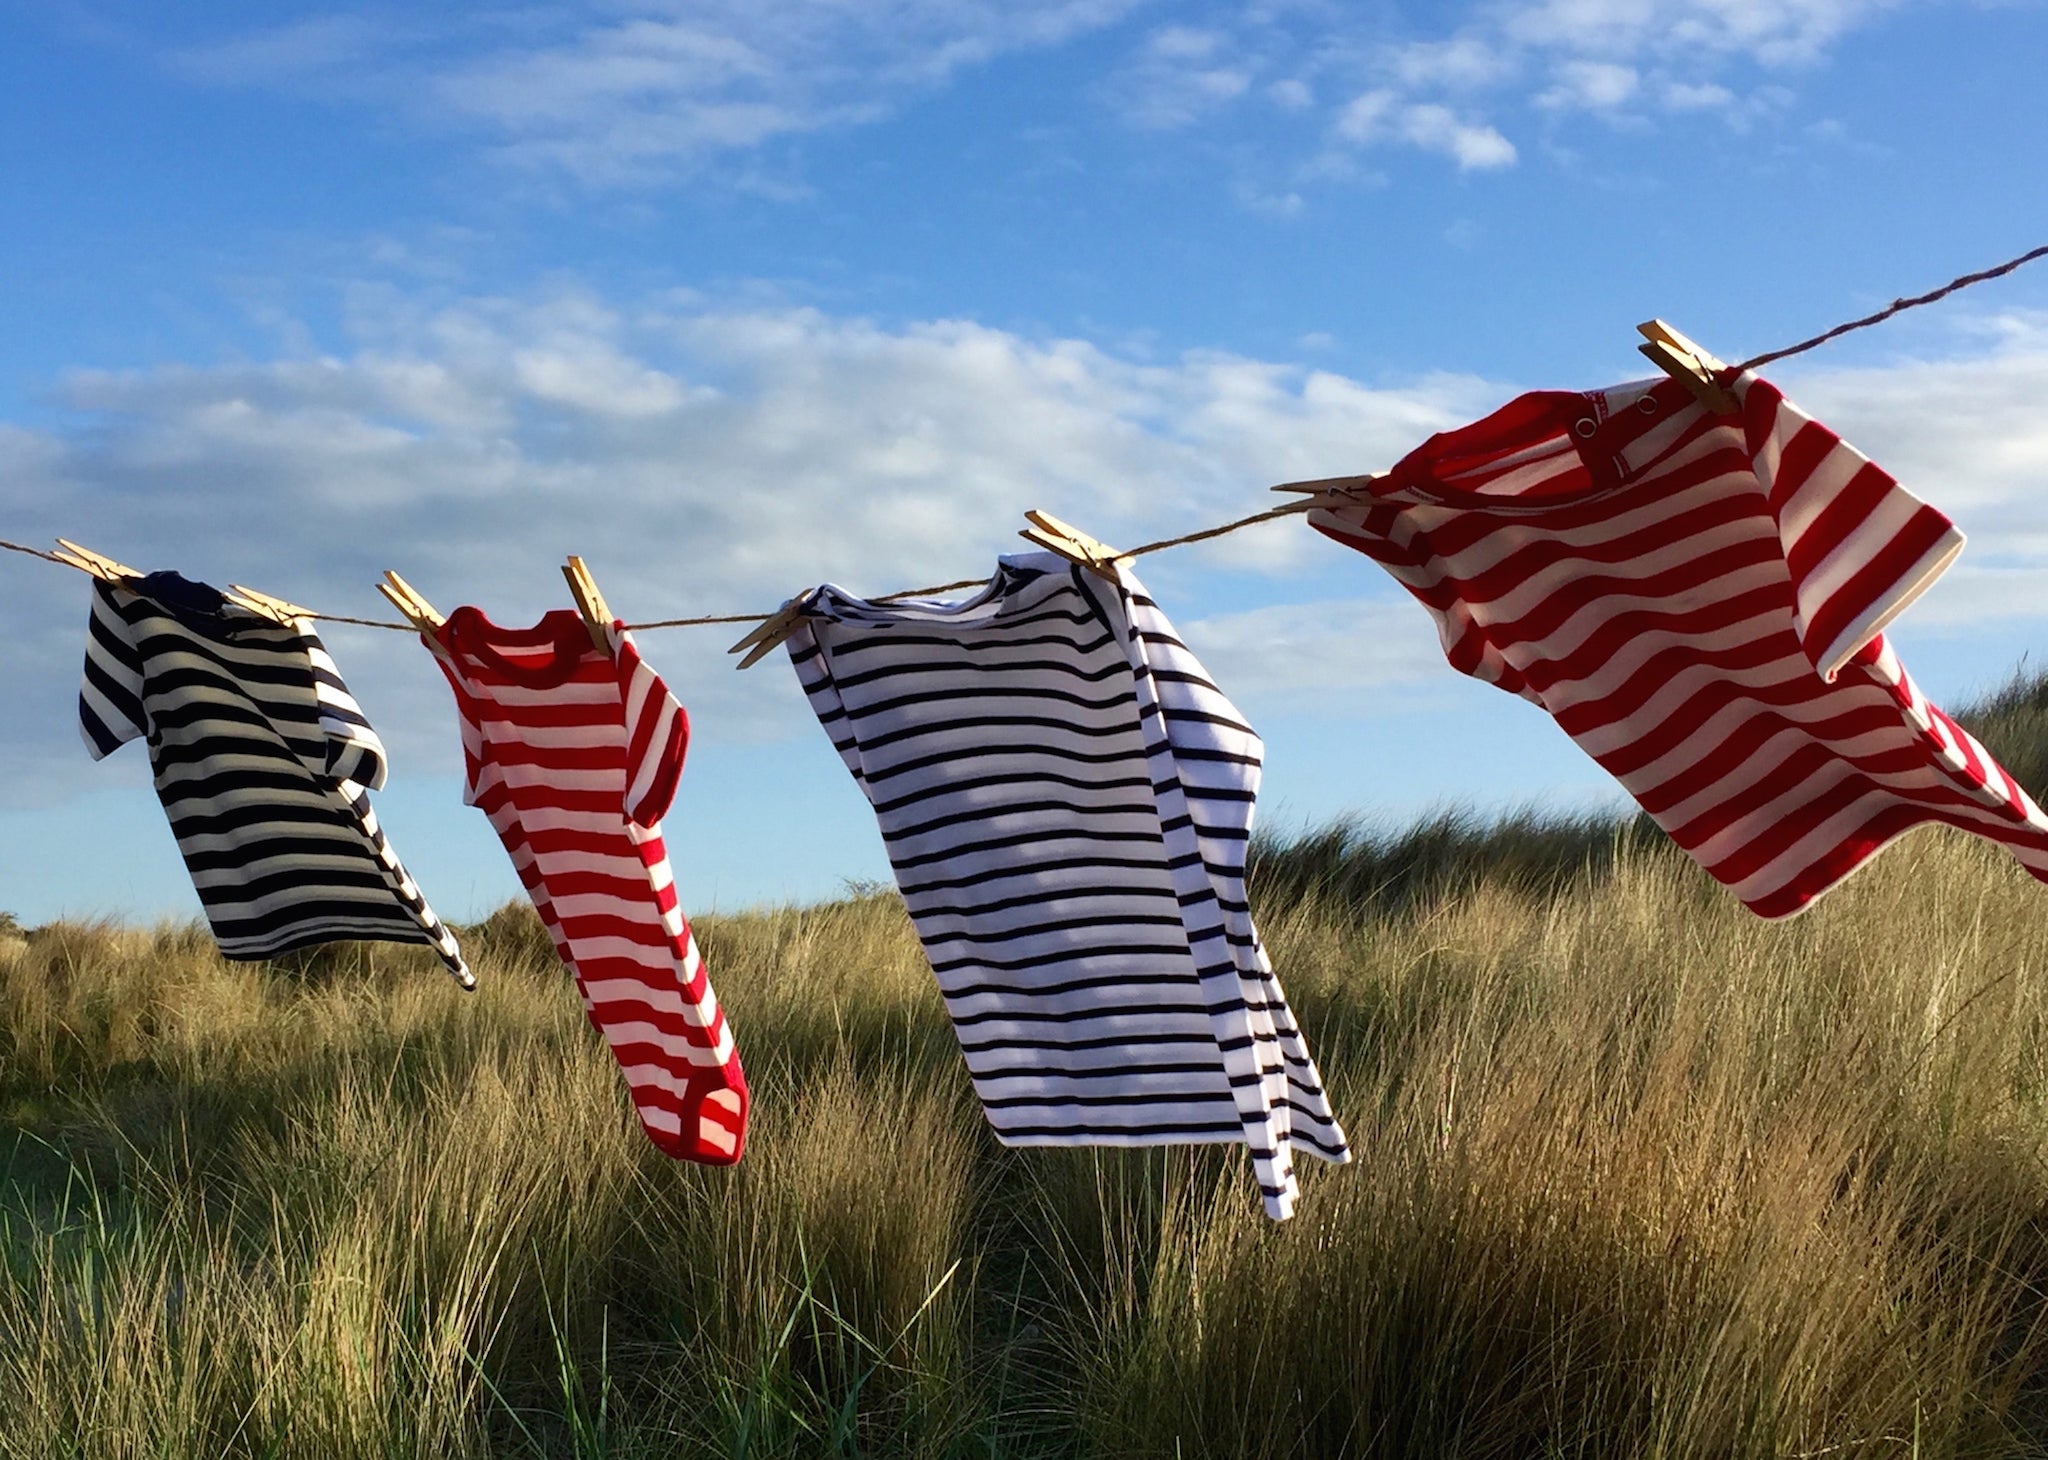 Organic cotton children's t-shirts in seaside stripes drying in the fresh air.